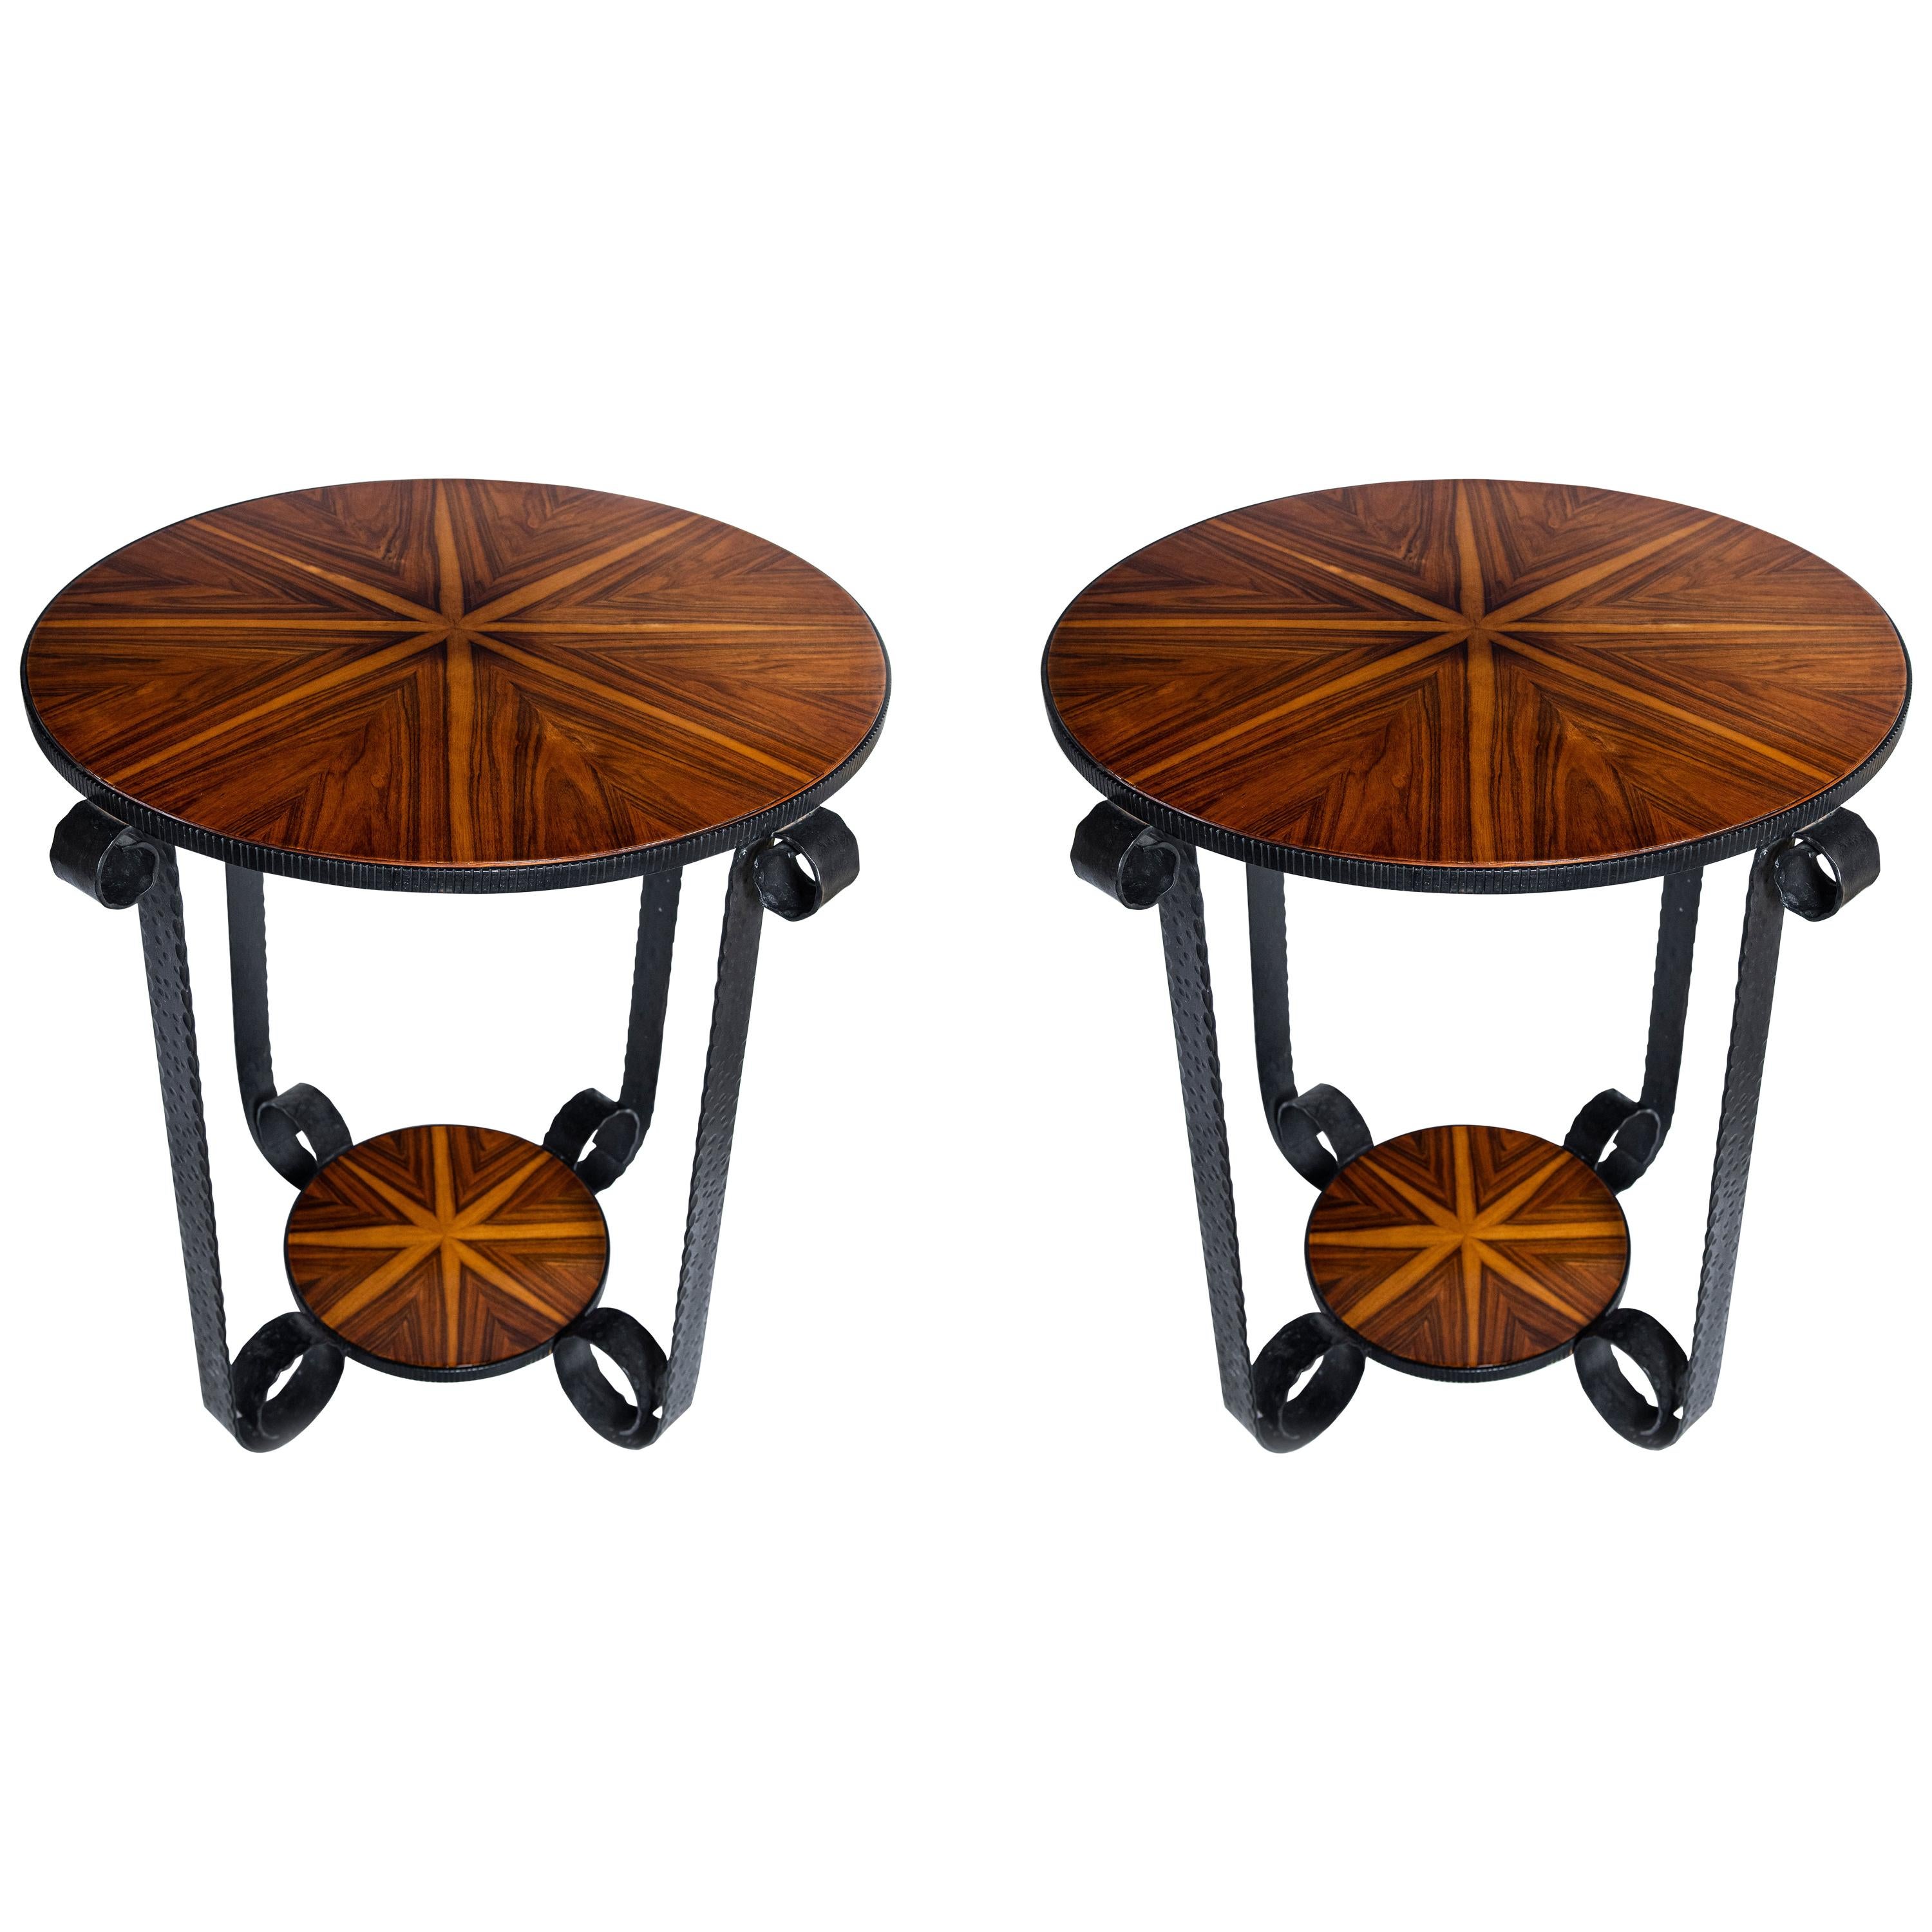 Pair of Wood and Iron Side Tables, Art Deco Period, France, circa 1930